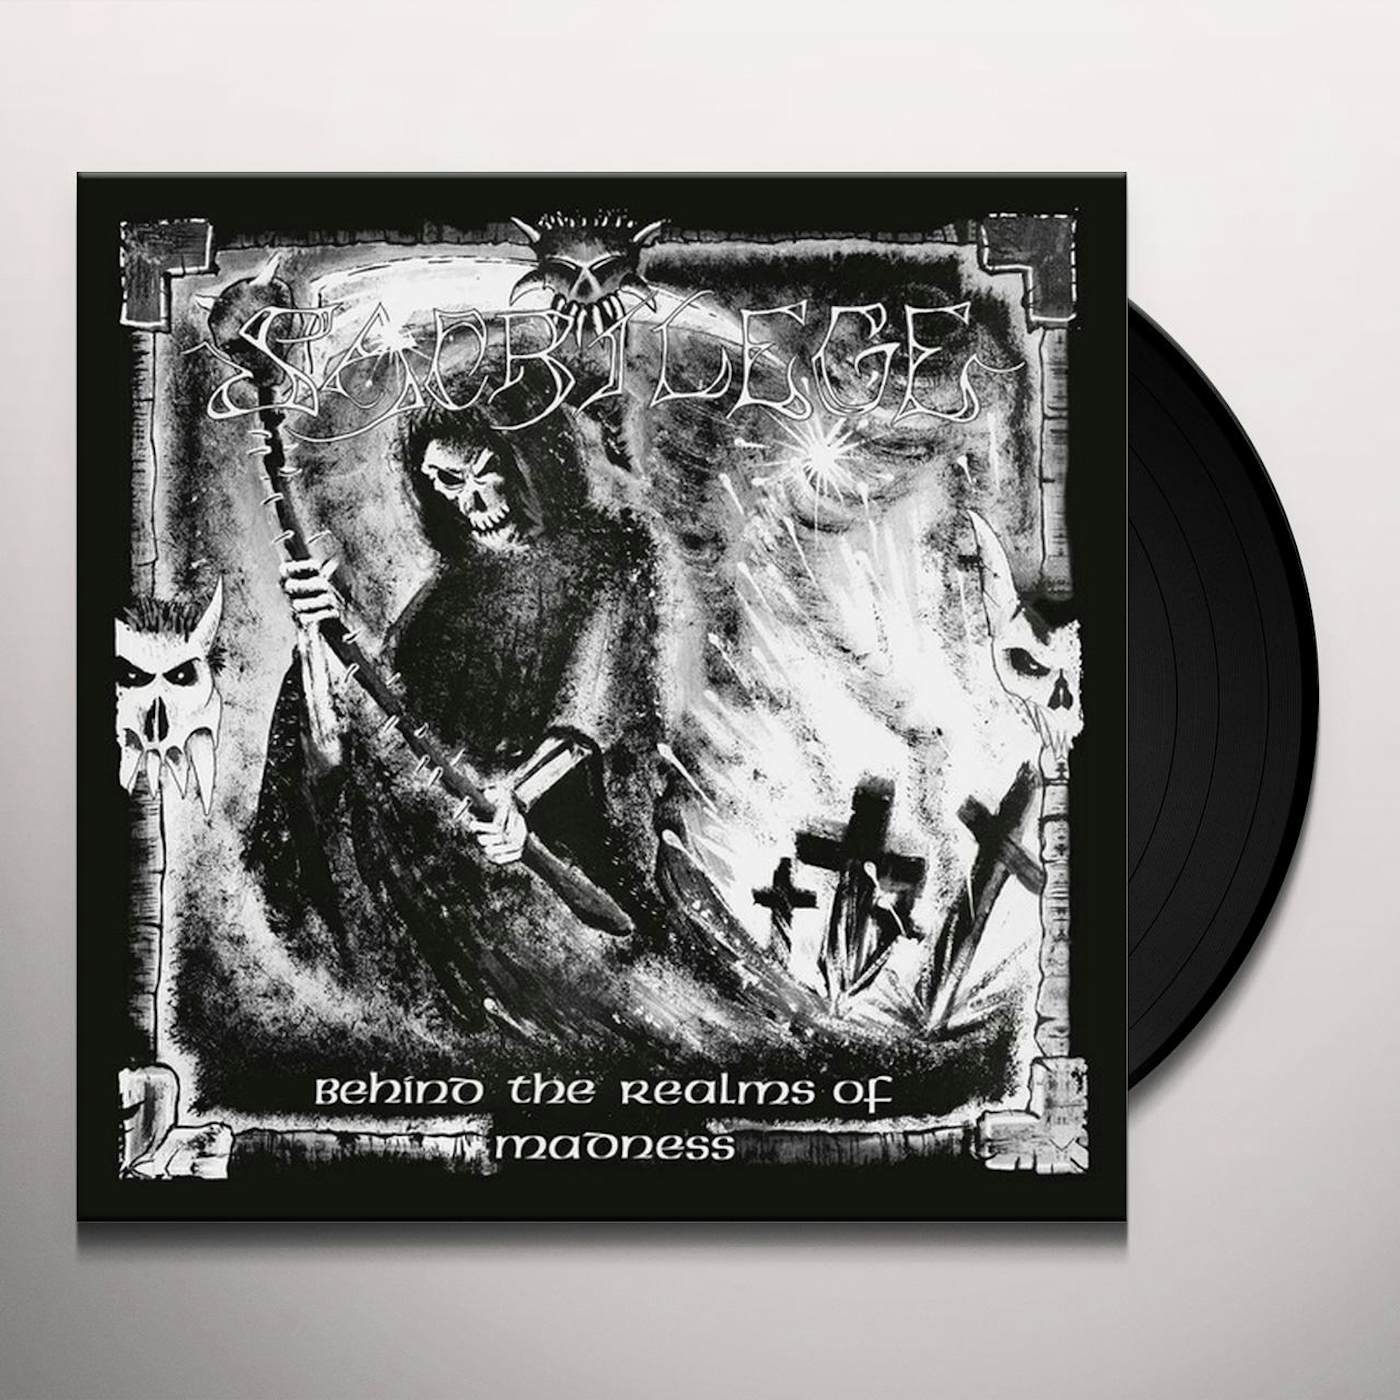 Sacrilege 117424 BEHIND THE REALMS OF MADNESS Vinyl Record